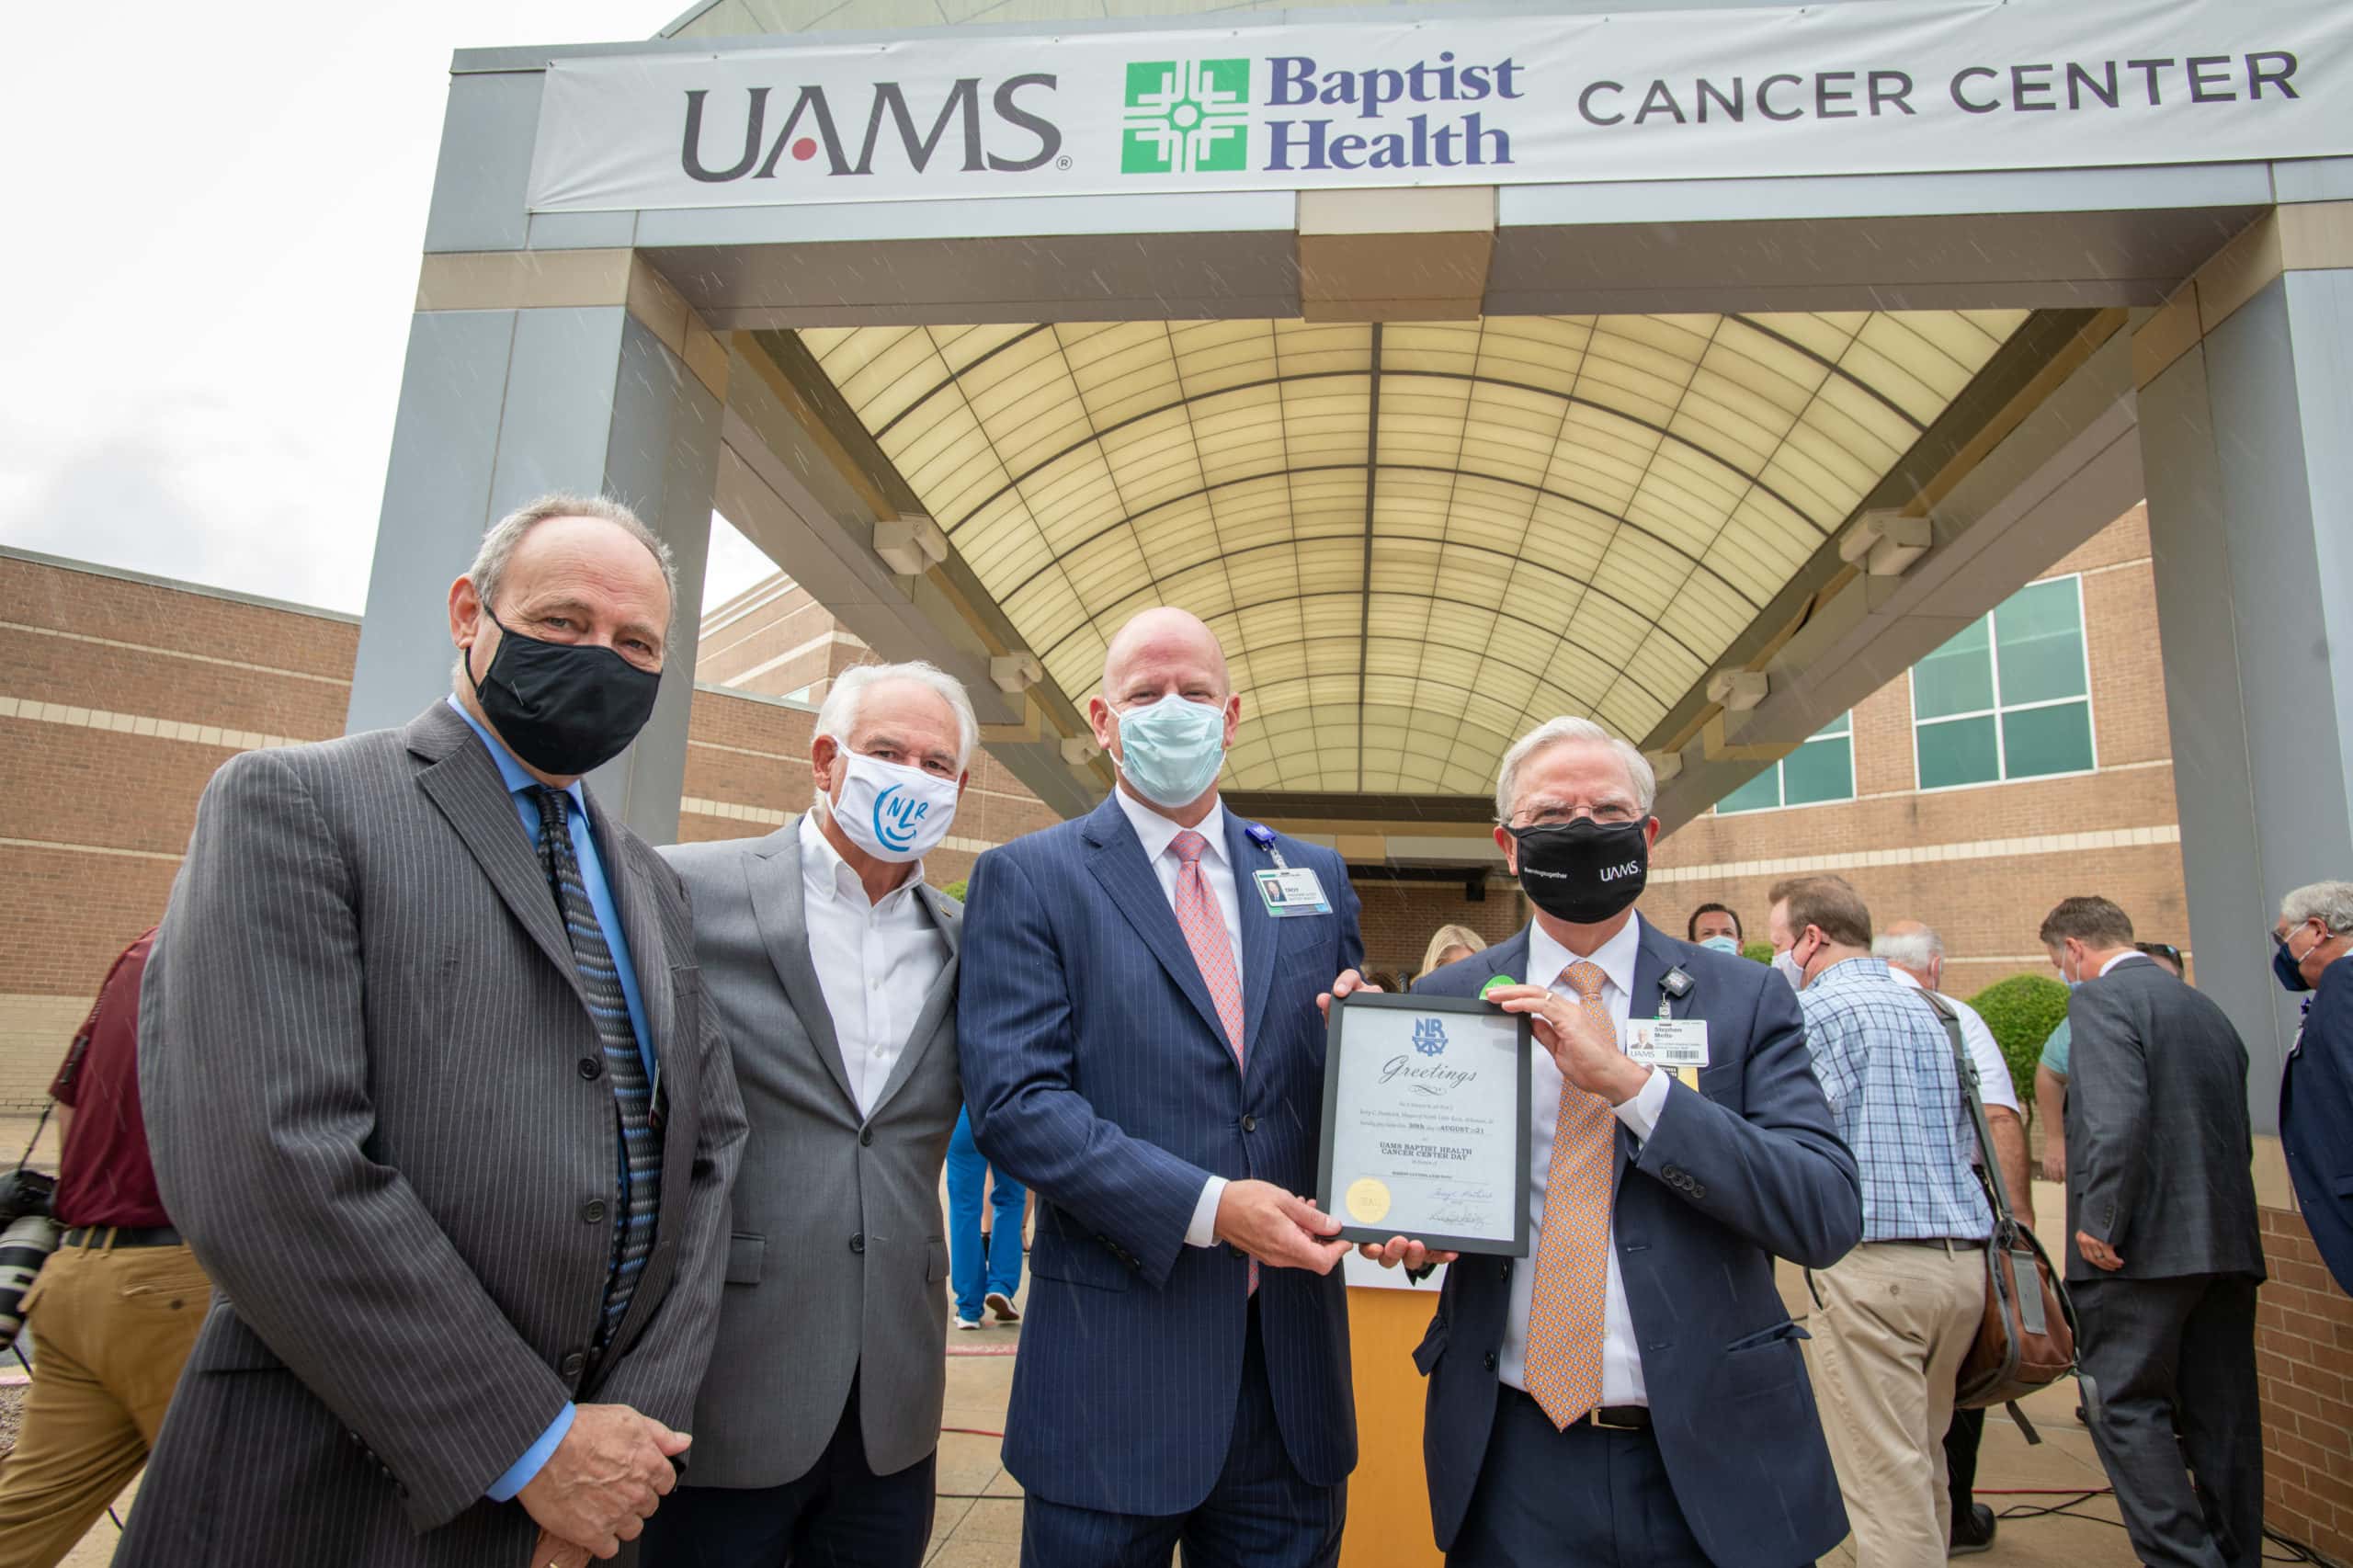 UAMS Winthrop P. Rockefeller Cancer Institute Director Michael Birrer, M.D., Ph.D., North Little Rock Mayor Terry Hartwick, Baptist Health CEO Troy Wells, and UAMS Senior Vice Chancellor and Medical Center CEO Steppe Mette, M.D., in front of the new UAMS Baptist Health Cancer Center in North Little Rock.